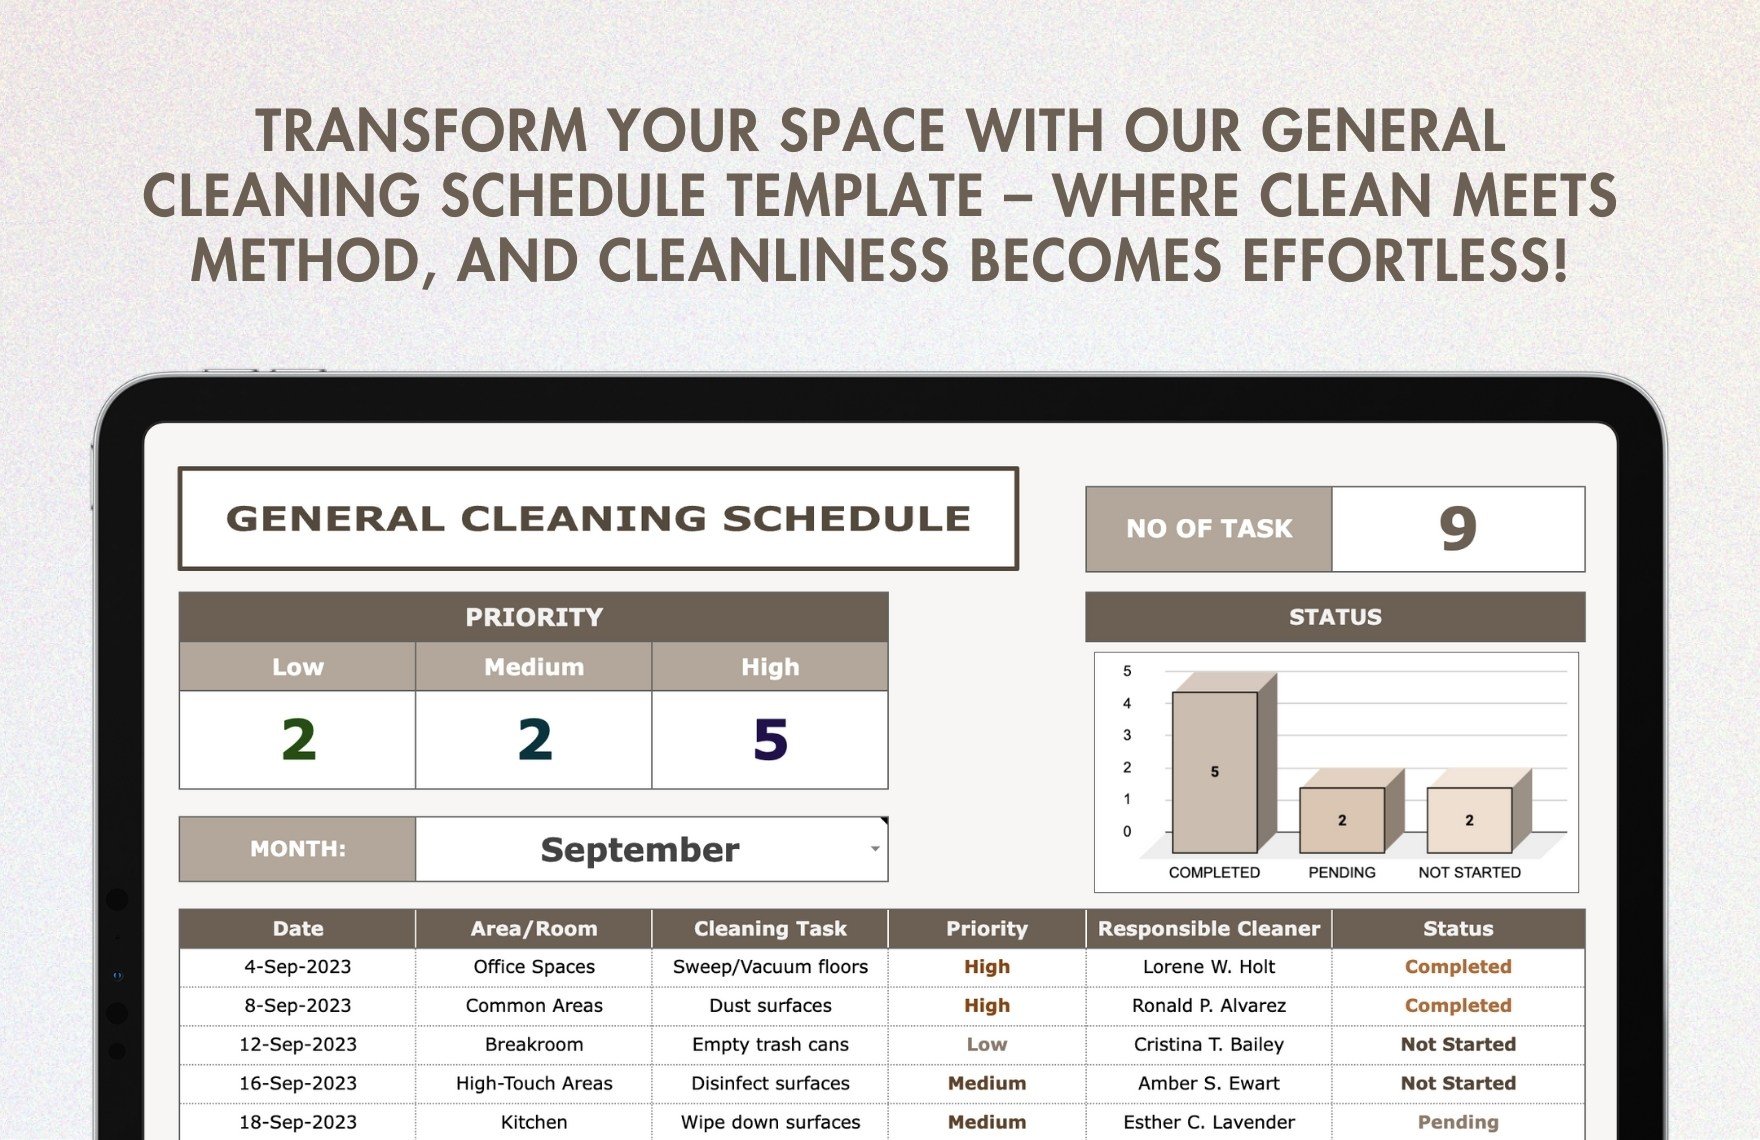 General Cleaning Schedule Template